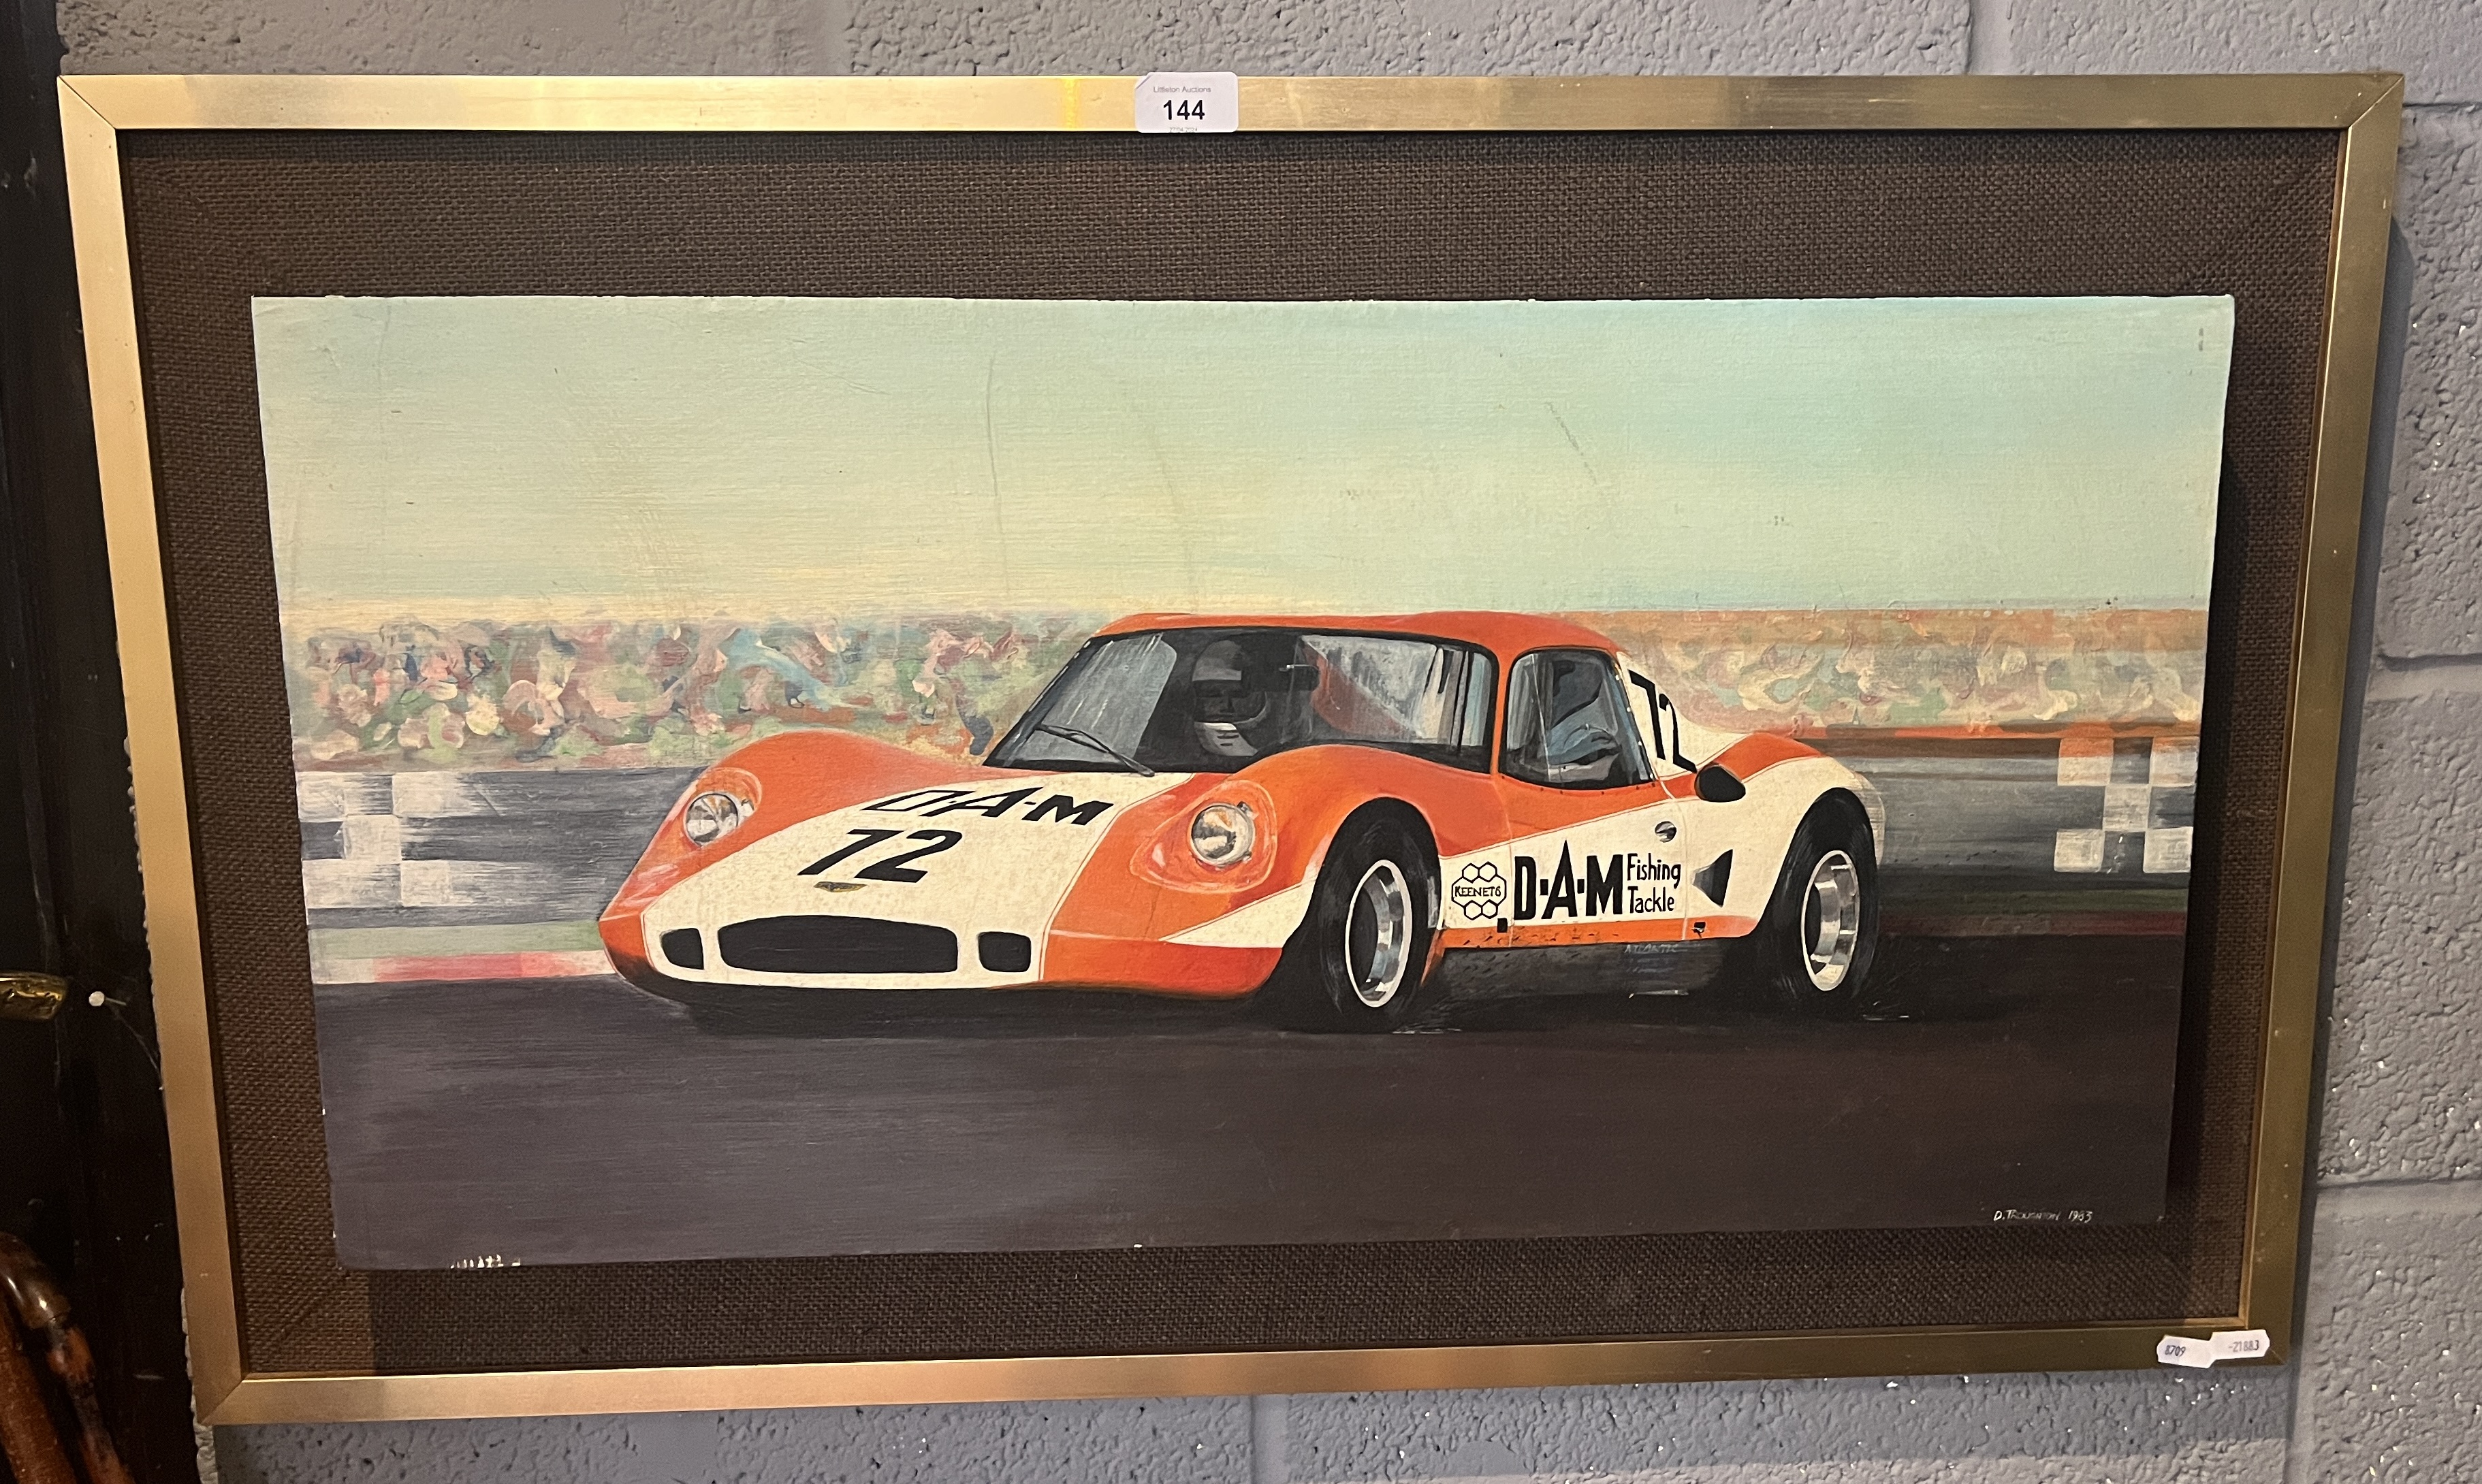 Framed oil on canvas of a Chevron B8 racing car signed D Troughton '83 - Approx 86cm x 53cm